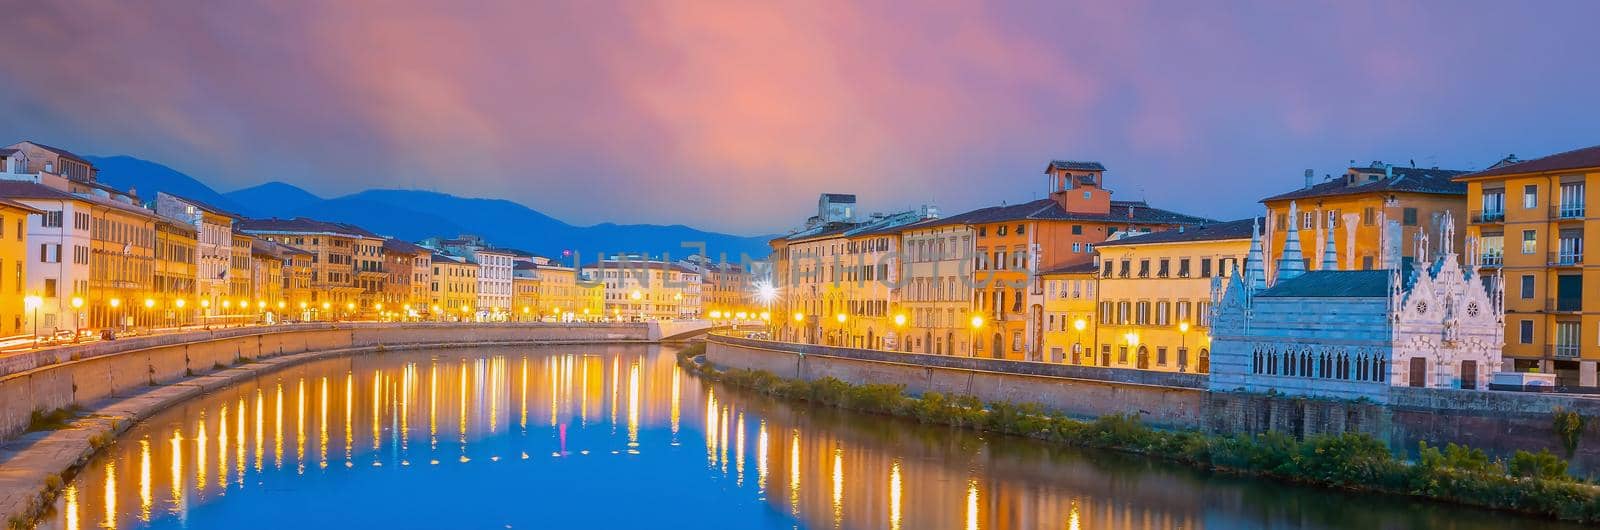 Citydscape with Pisa old town and Arno river in Italy by f11photo